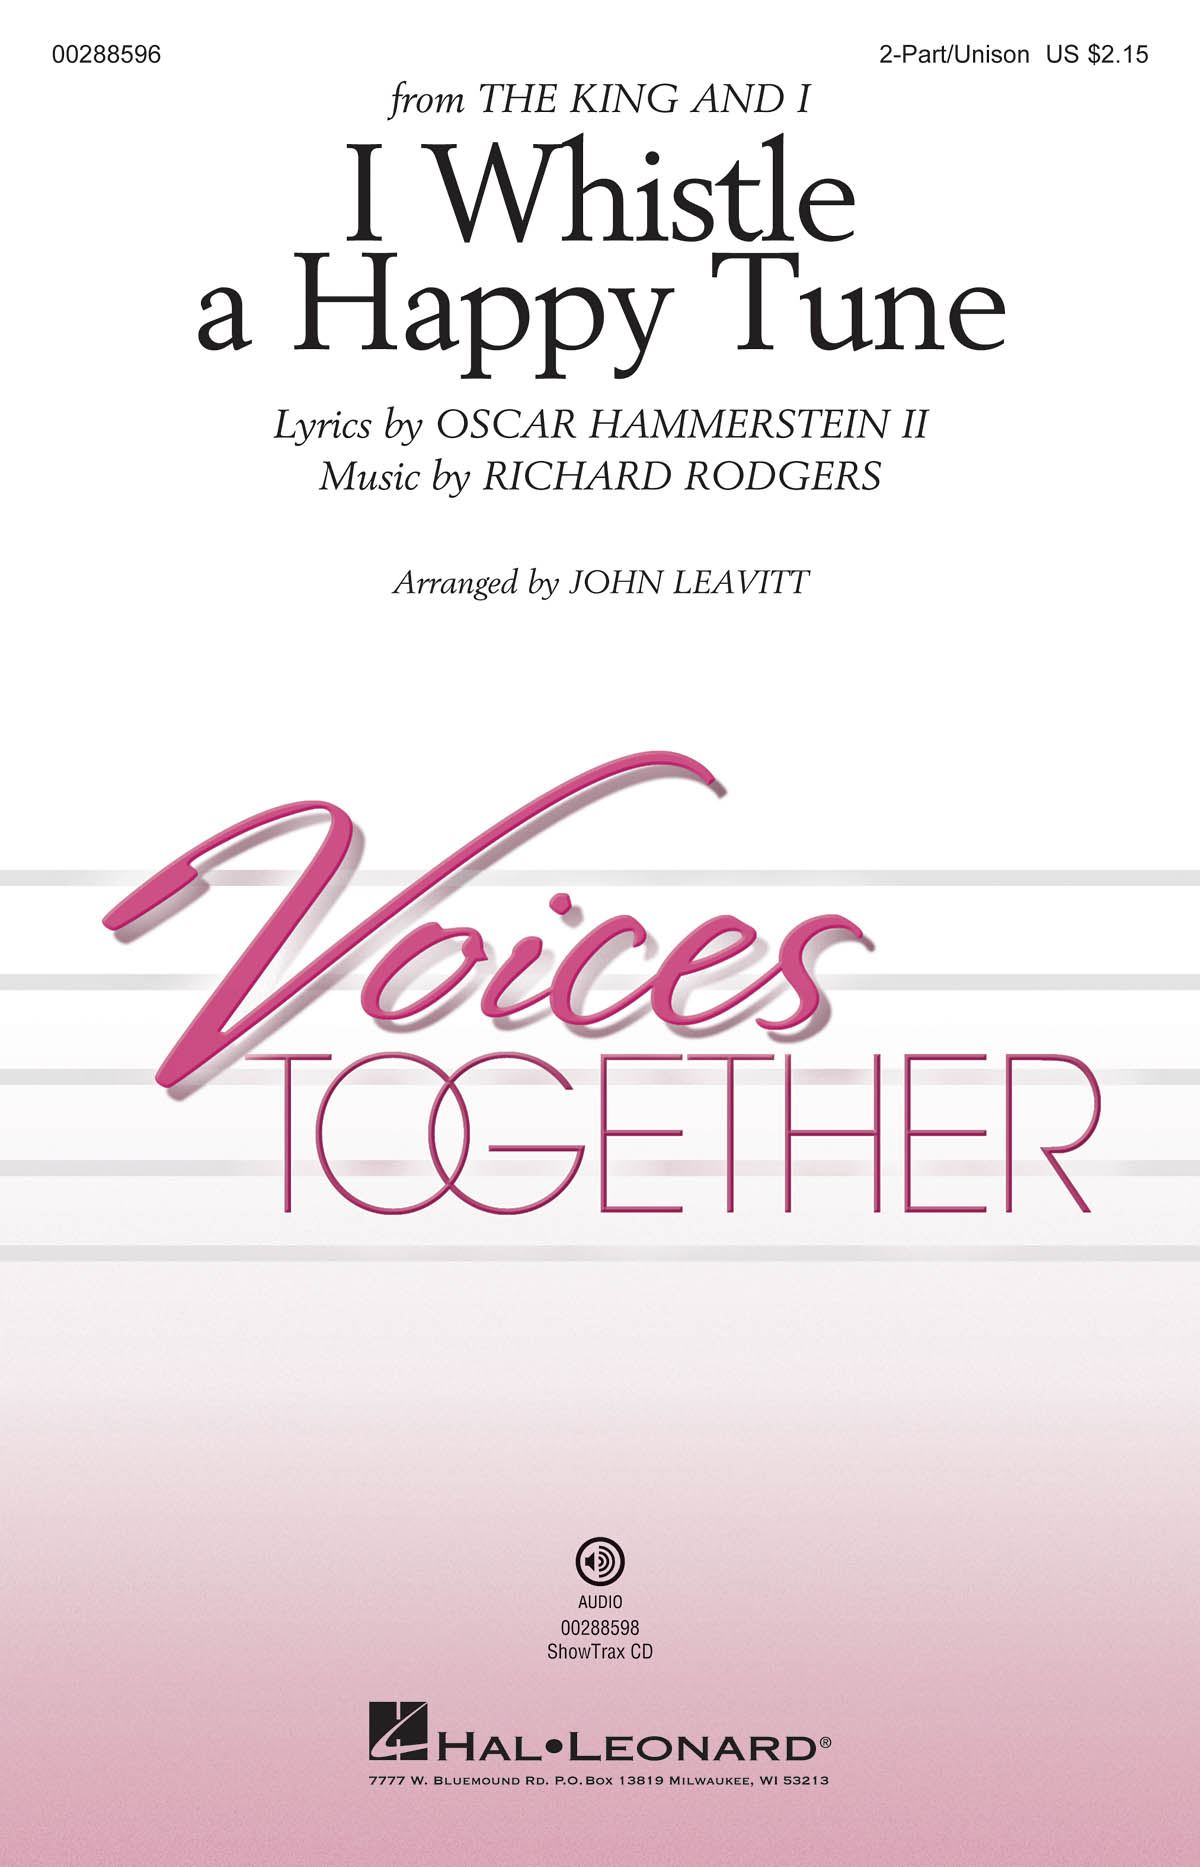 Richard Rodgers: I Whistle a Happy Tune: Mixed Choir a Cappella: Vocal Score